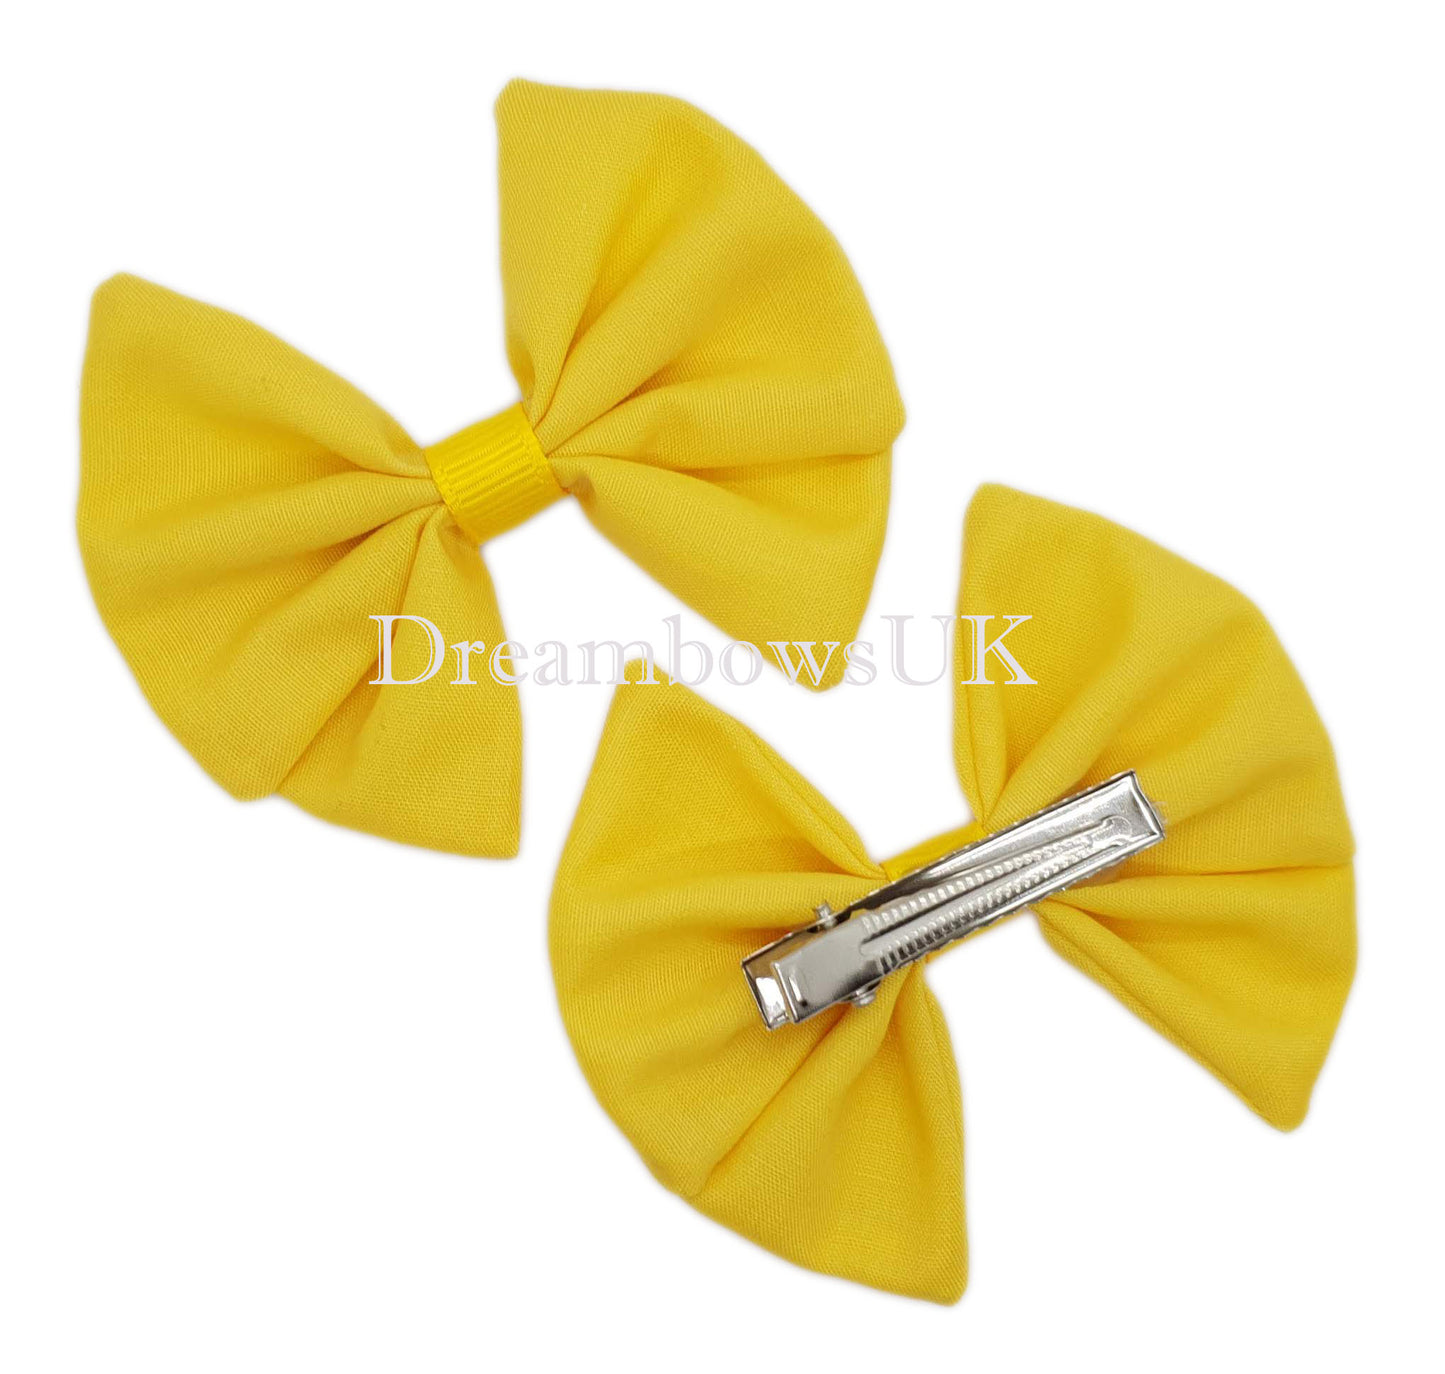 golden yellow hair bows on alligator clips